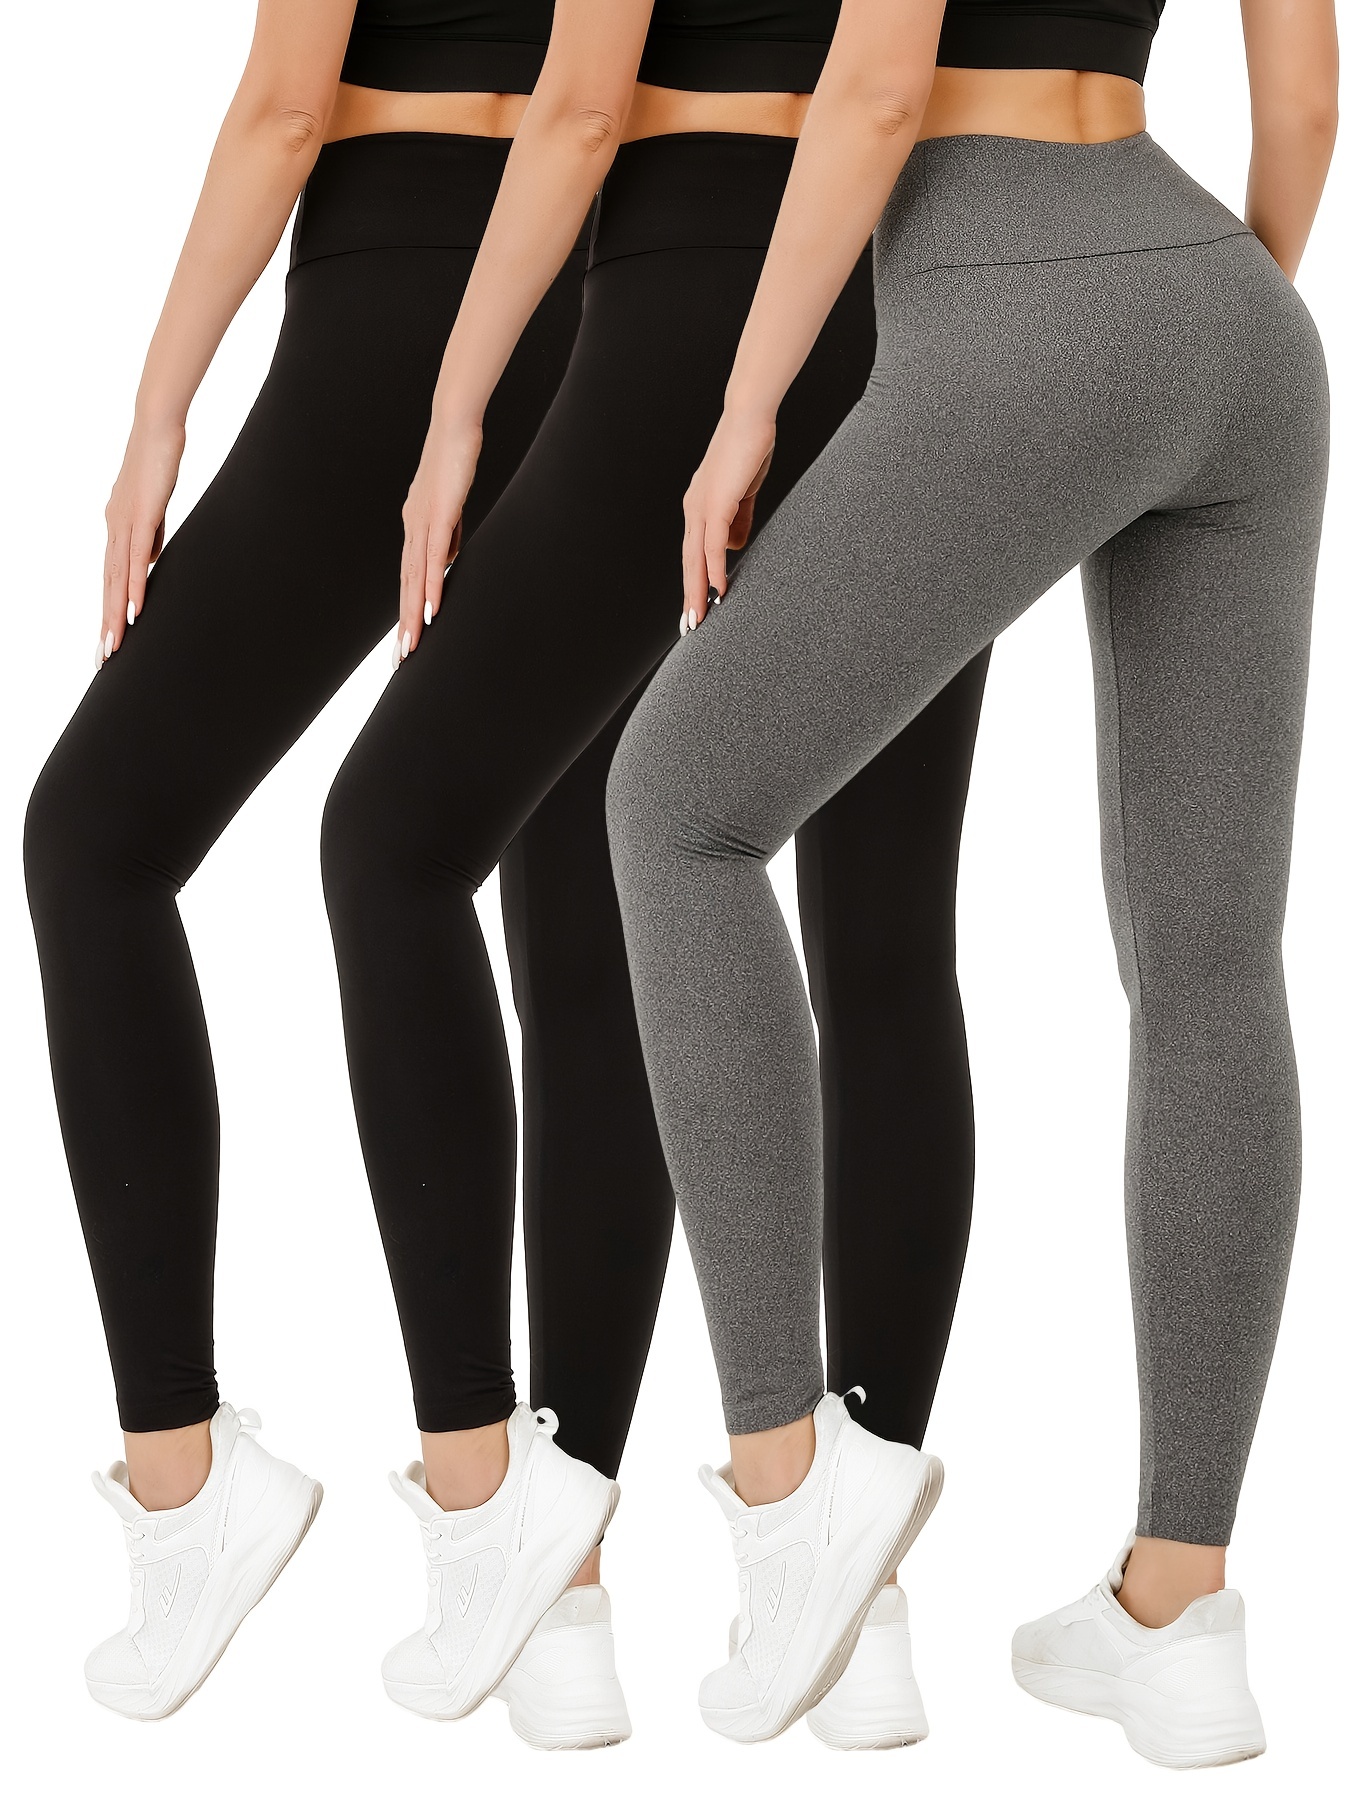 LSFYSZD Women's Solid Color Sports Leggings Non See Through High